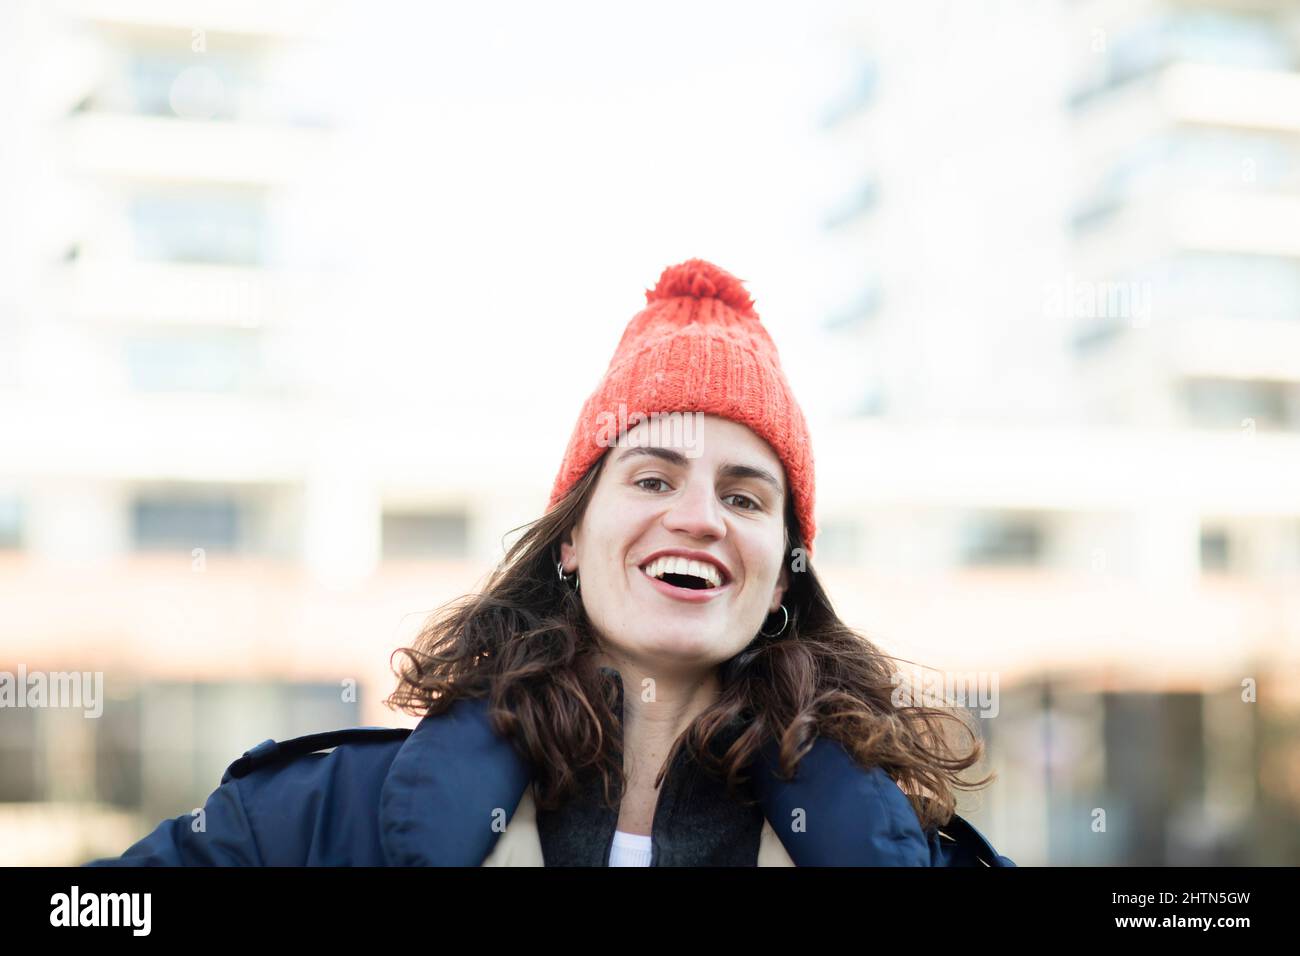 Portrait of smiling woman in knit hat outdoors Stock Photo